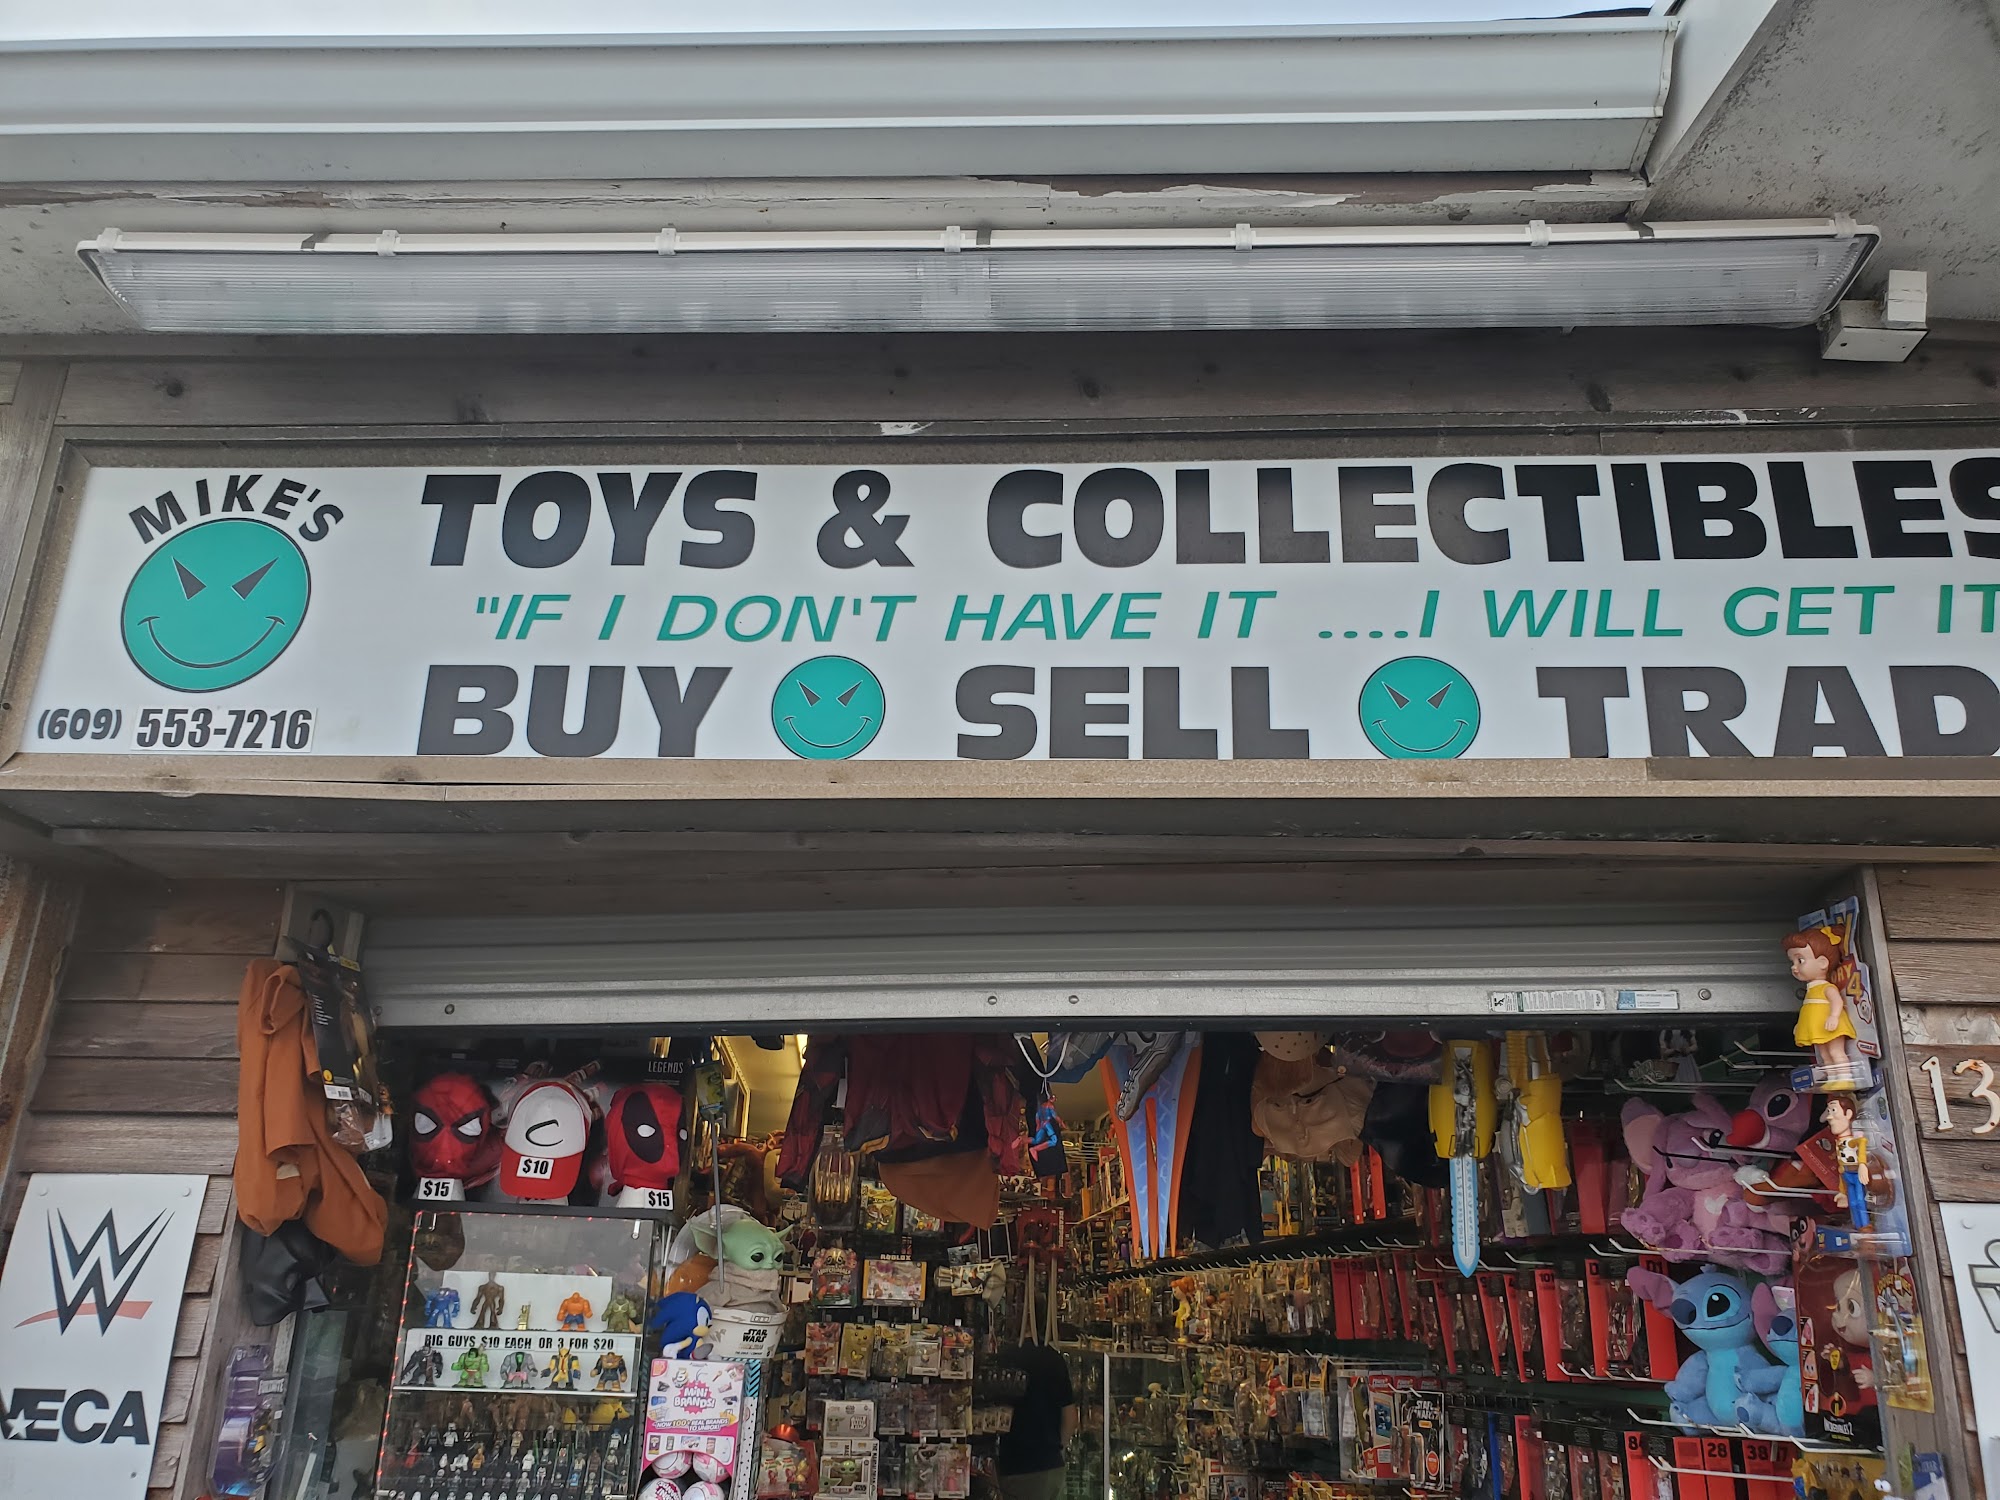 Mike's Toys and Collectibles